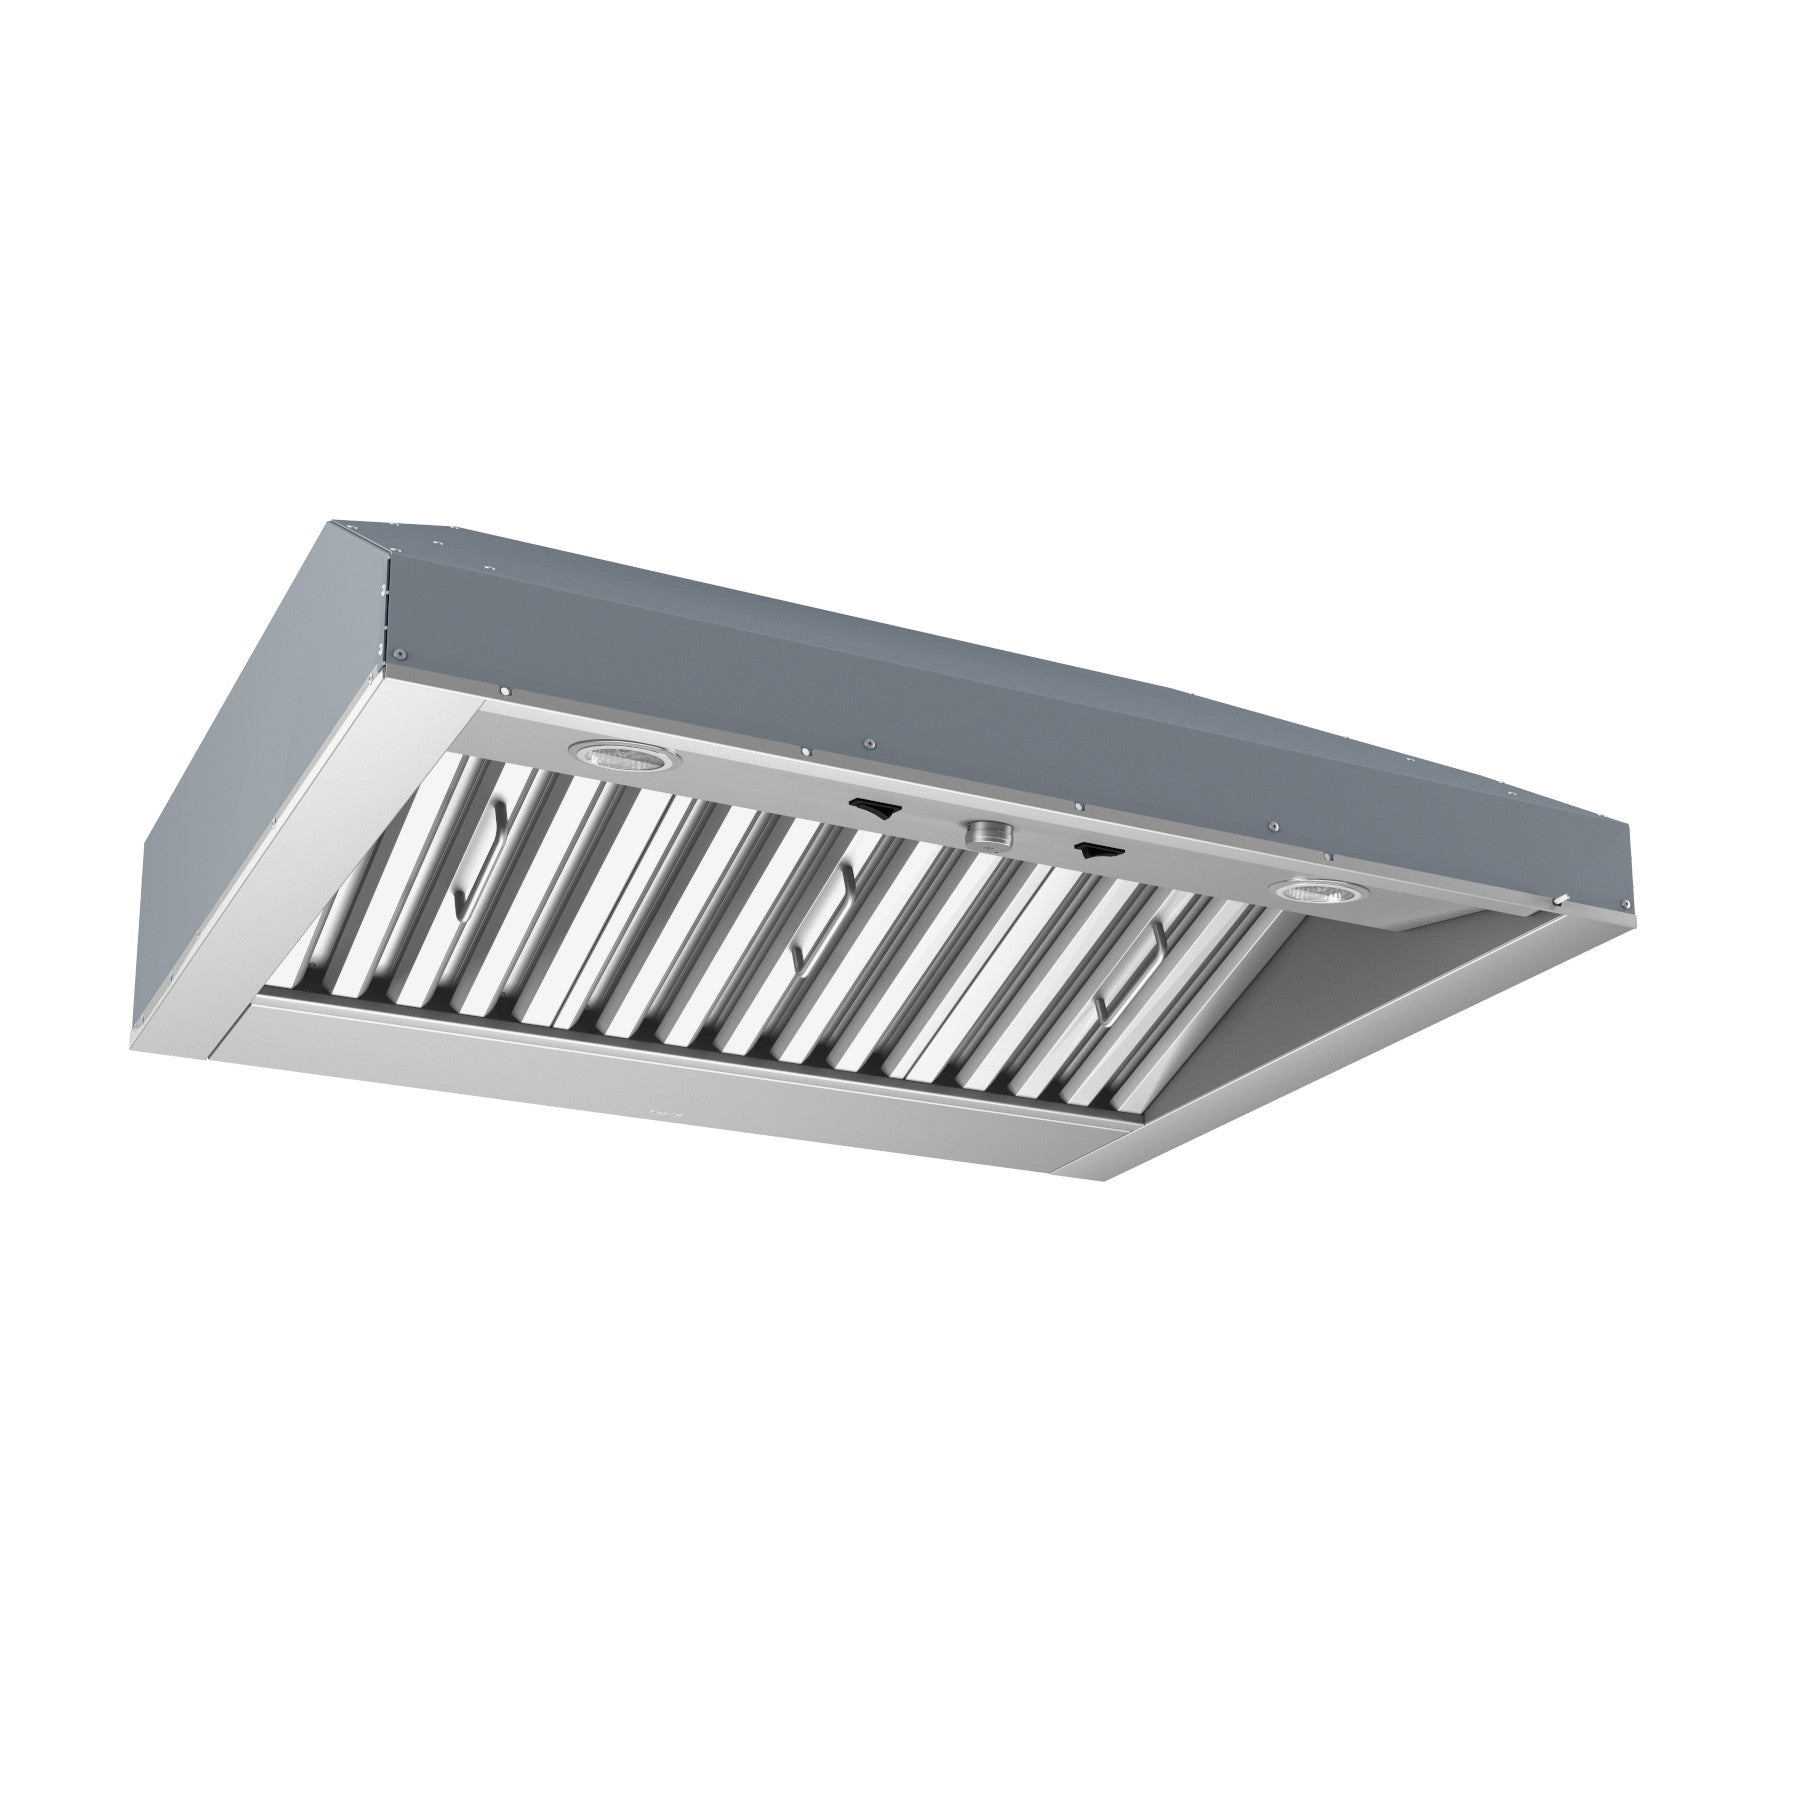 Best - 34.38 Inch Outdoor Range Hood Insert Vent in Stainless - CPD9M363SB